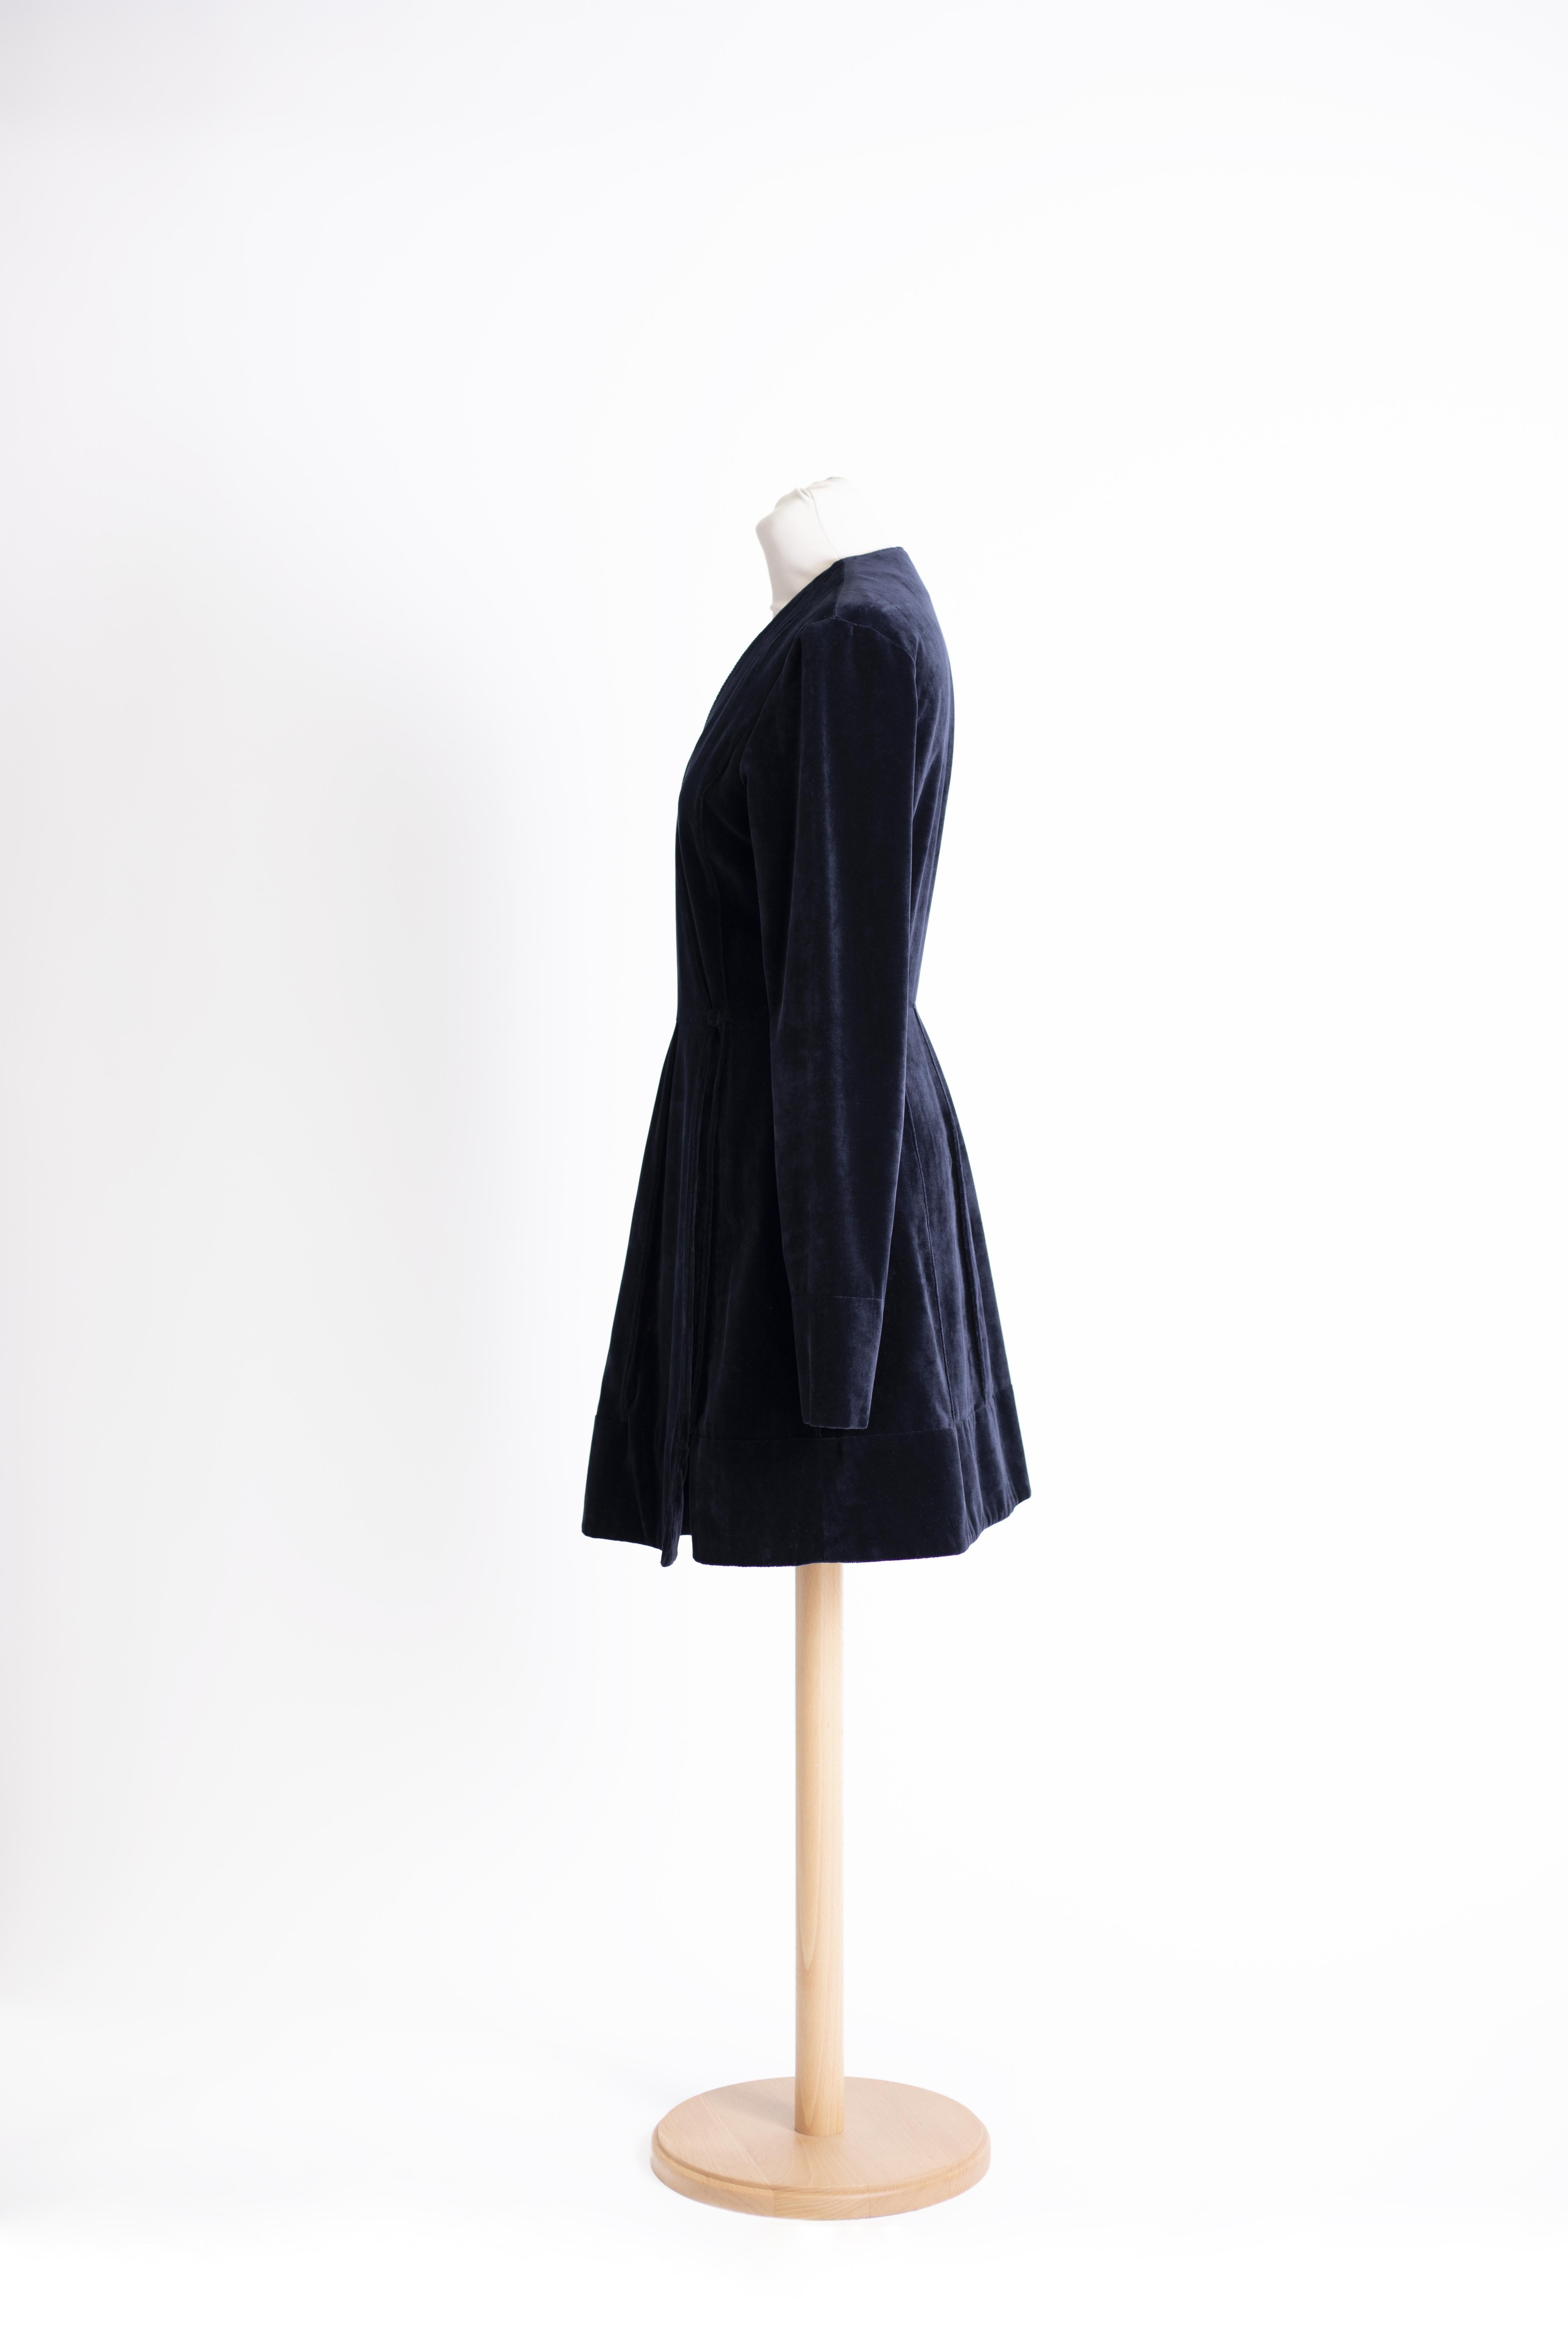 1980s Michel Klein Blue velvet dress with crossed 
V-neck and full skirt, long sleeves. Knee length. Button closure on the front.

Size IT : 40
Size USA: 6

MEASURES
Waist: 68 cm
Length  : 84 cm
Bust: 92 cm